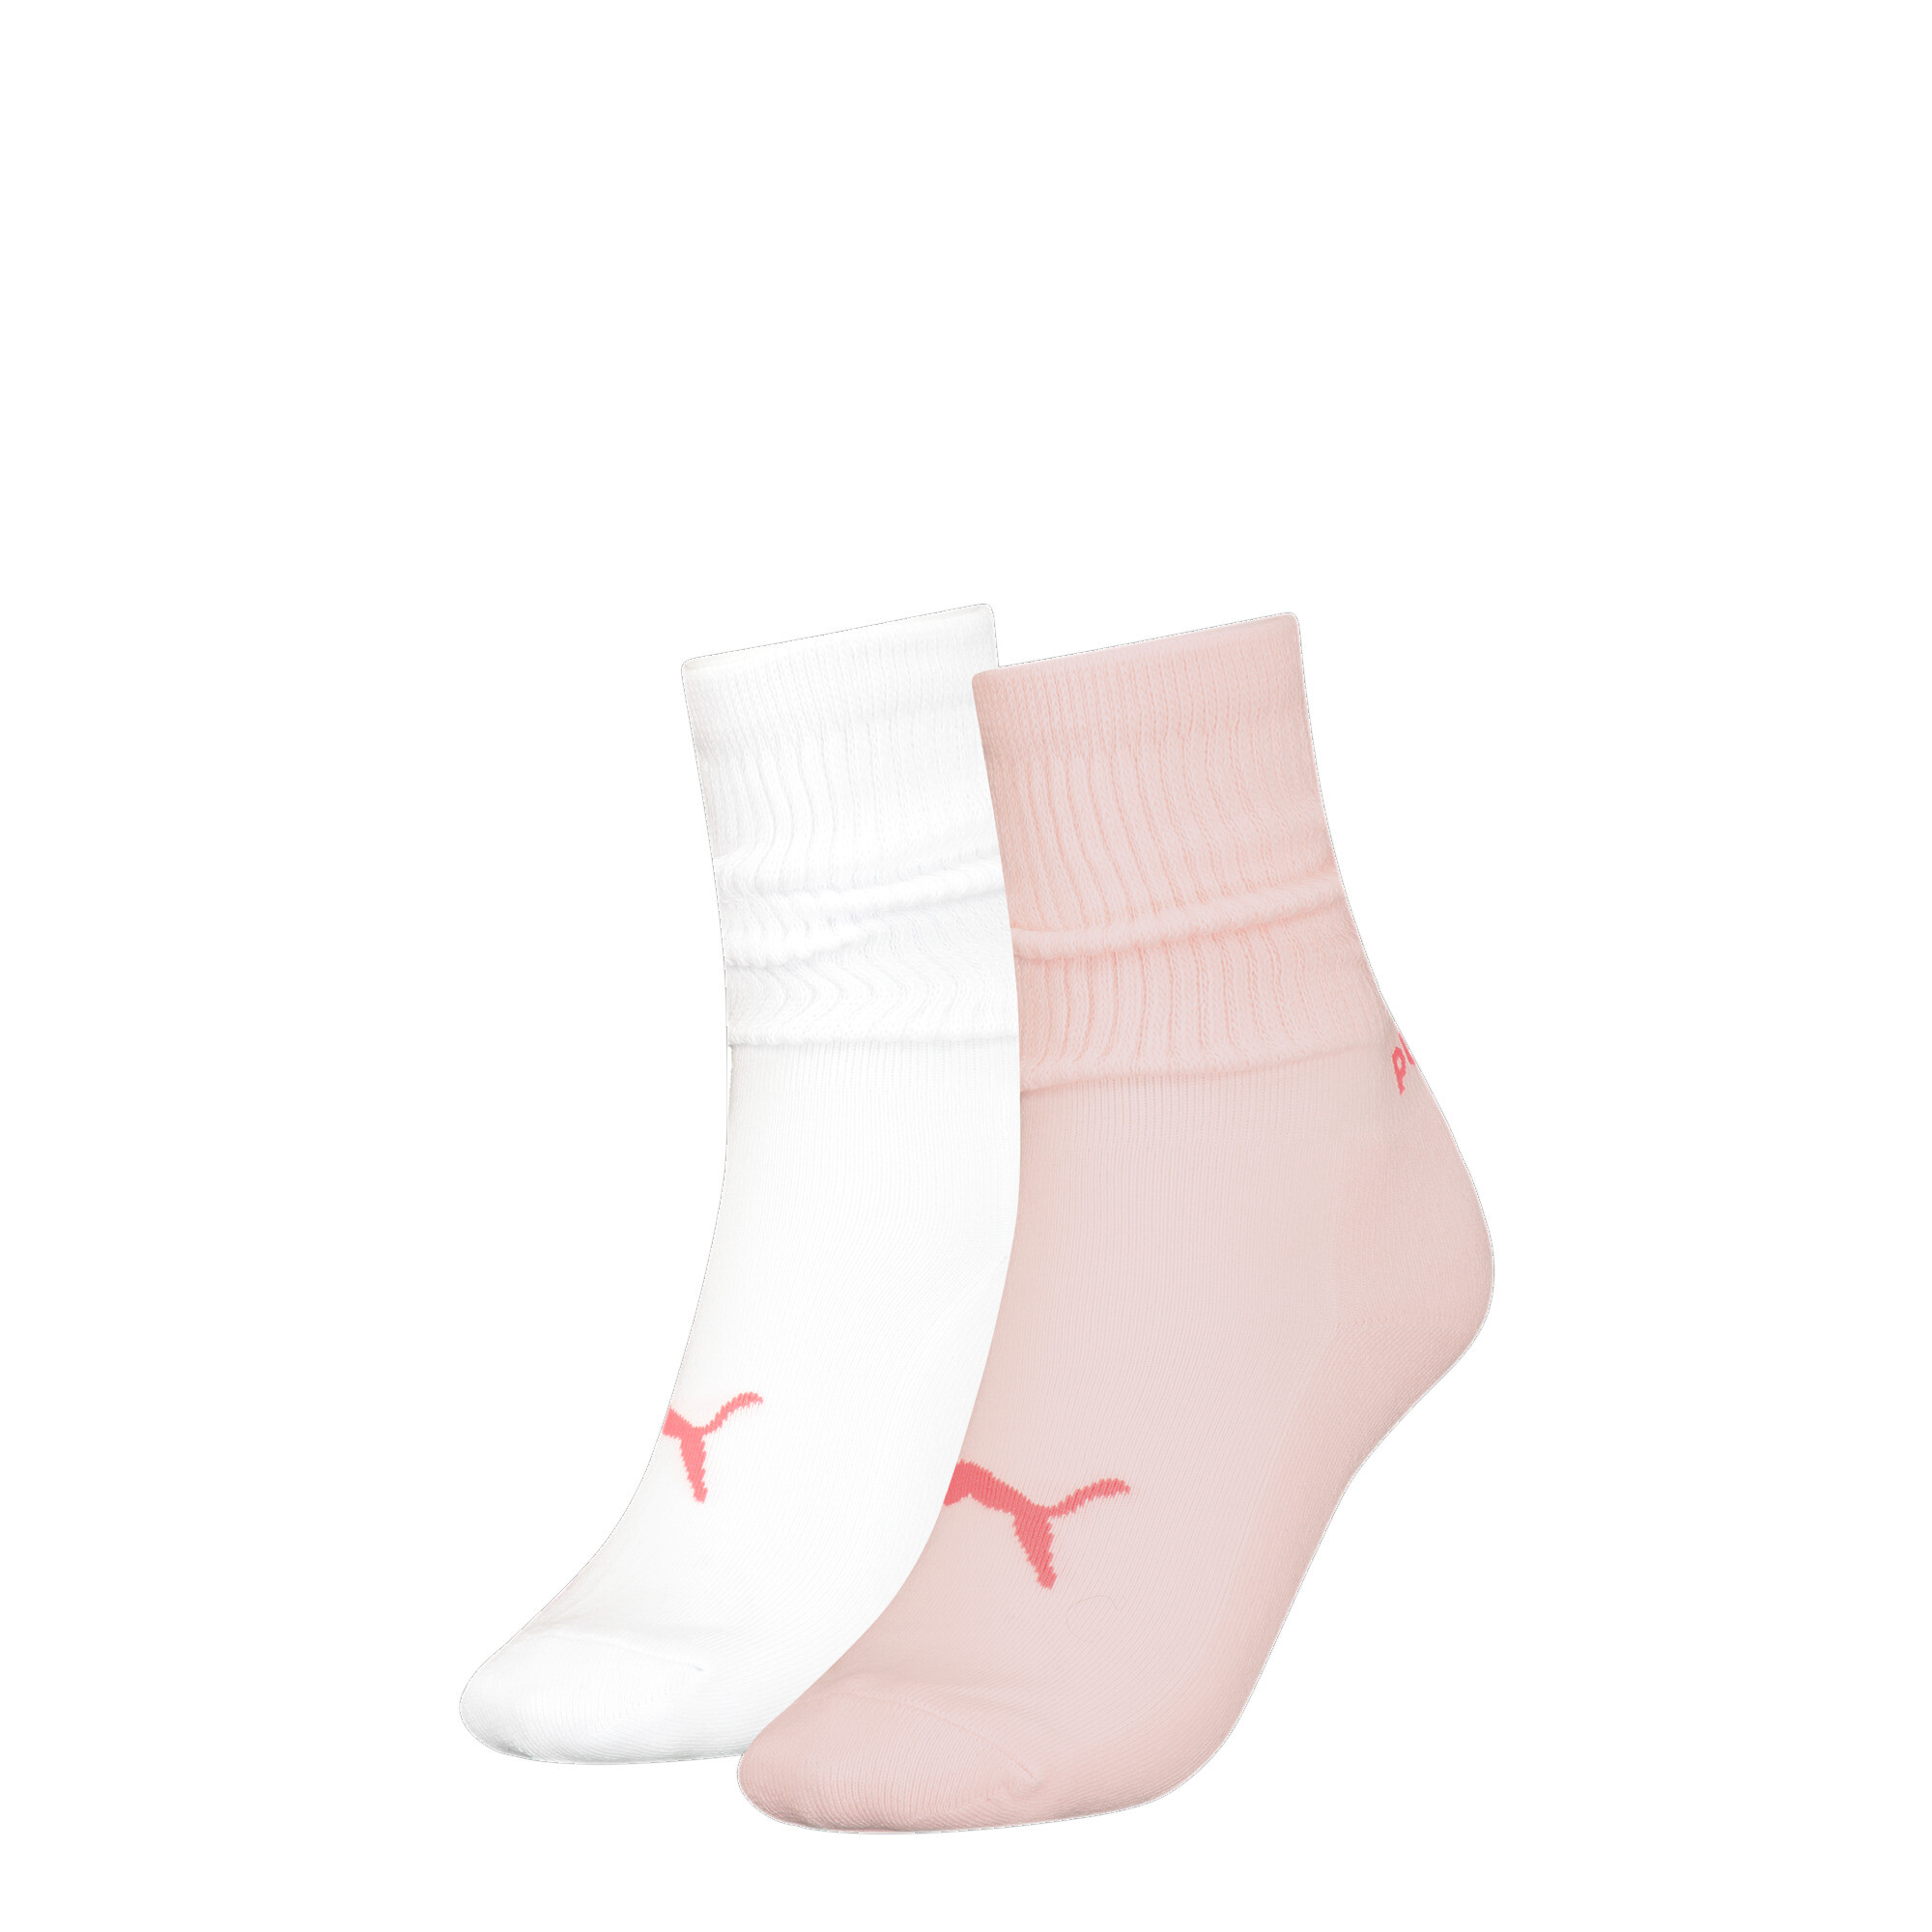 Women's PUMA Slouch Crew Socks 2 Pack In Pink, Size 39-42